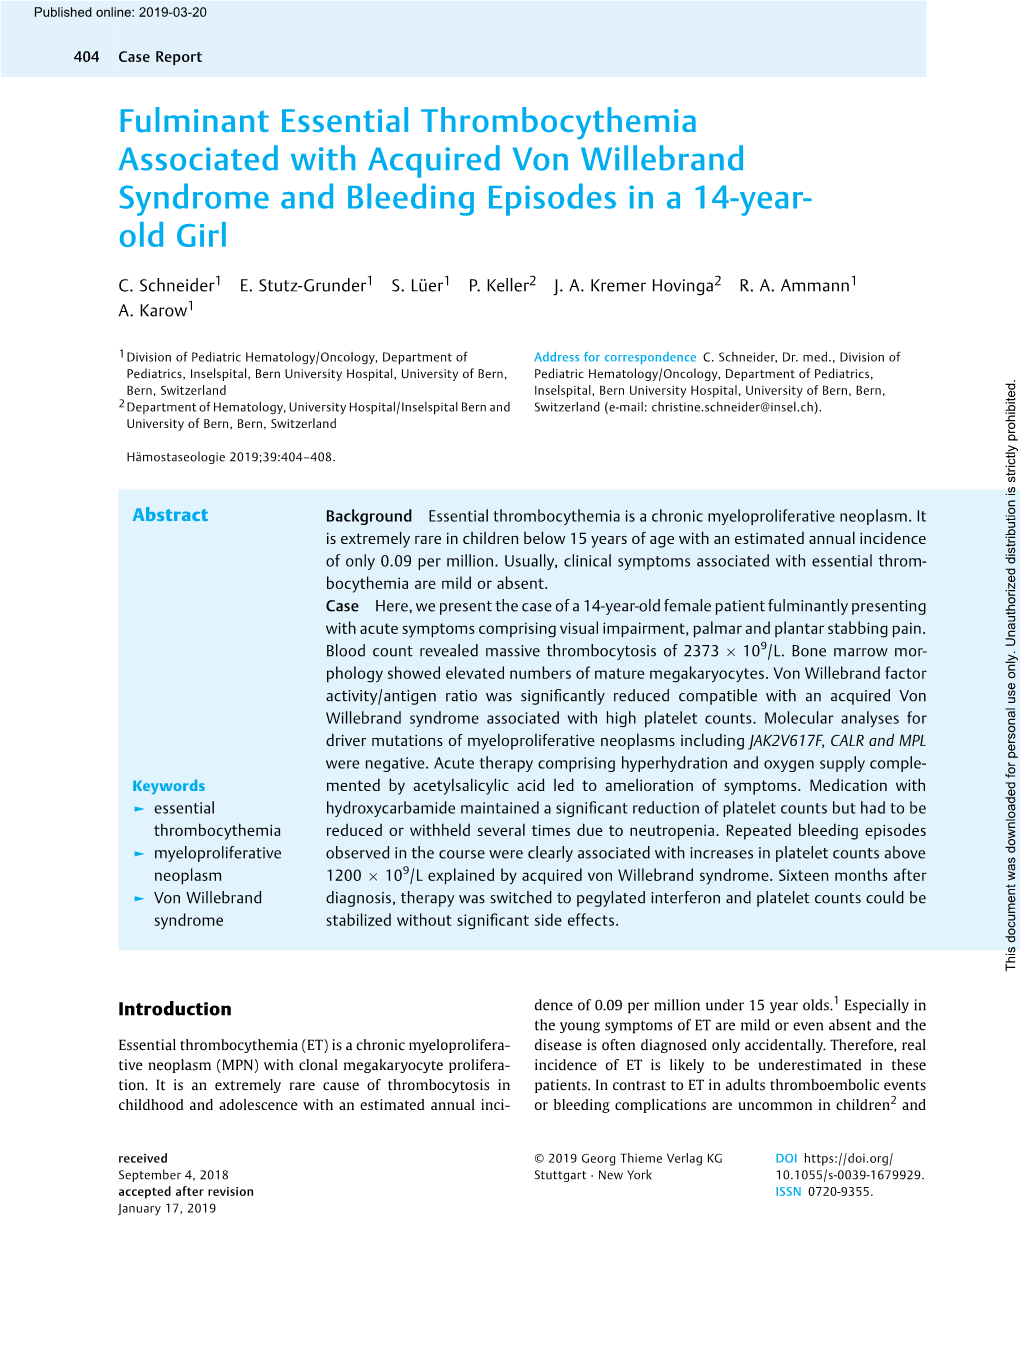 Fulminant Essential Thrombocythemia Associated with Acquired Von Willebrand Syndrome and Bleeding Episodes in a 14-Year- Old Girl